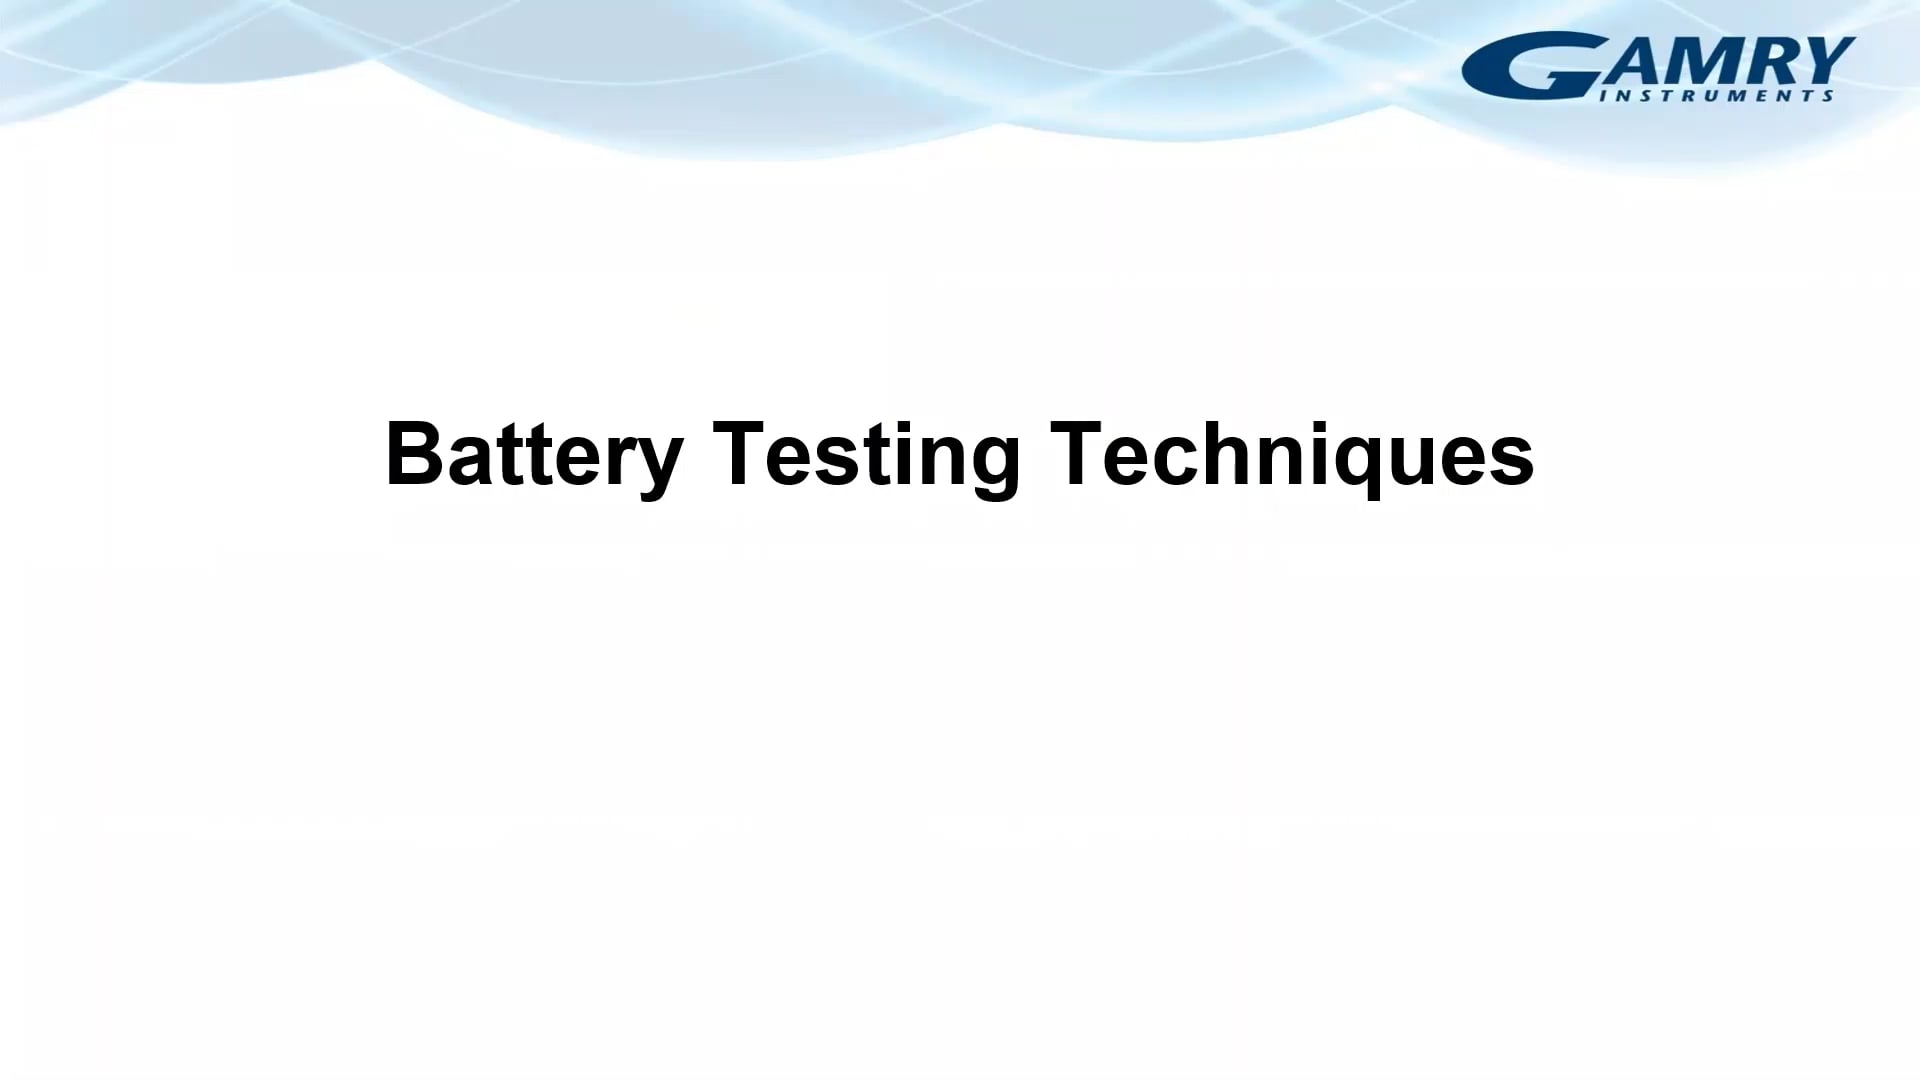 Battery Testing Techniques